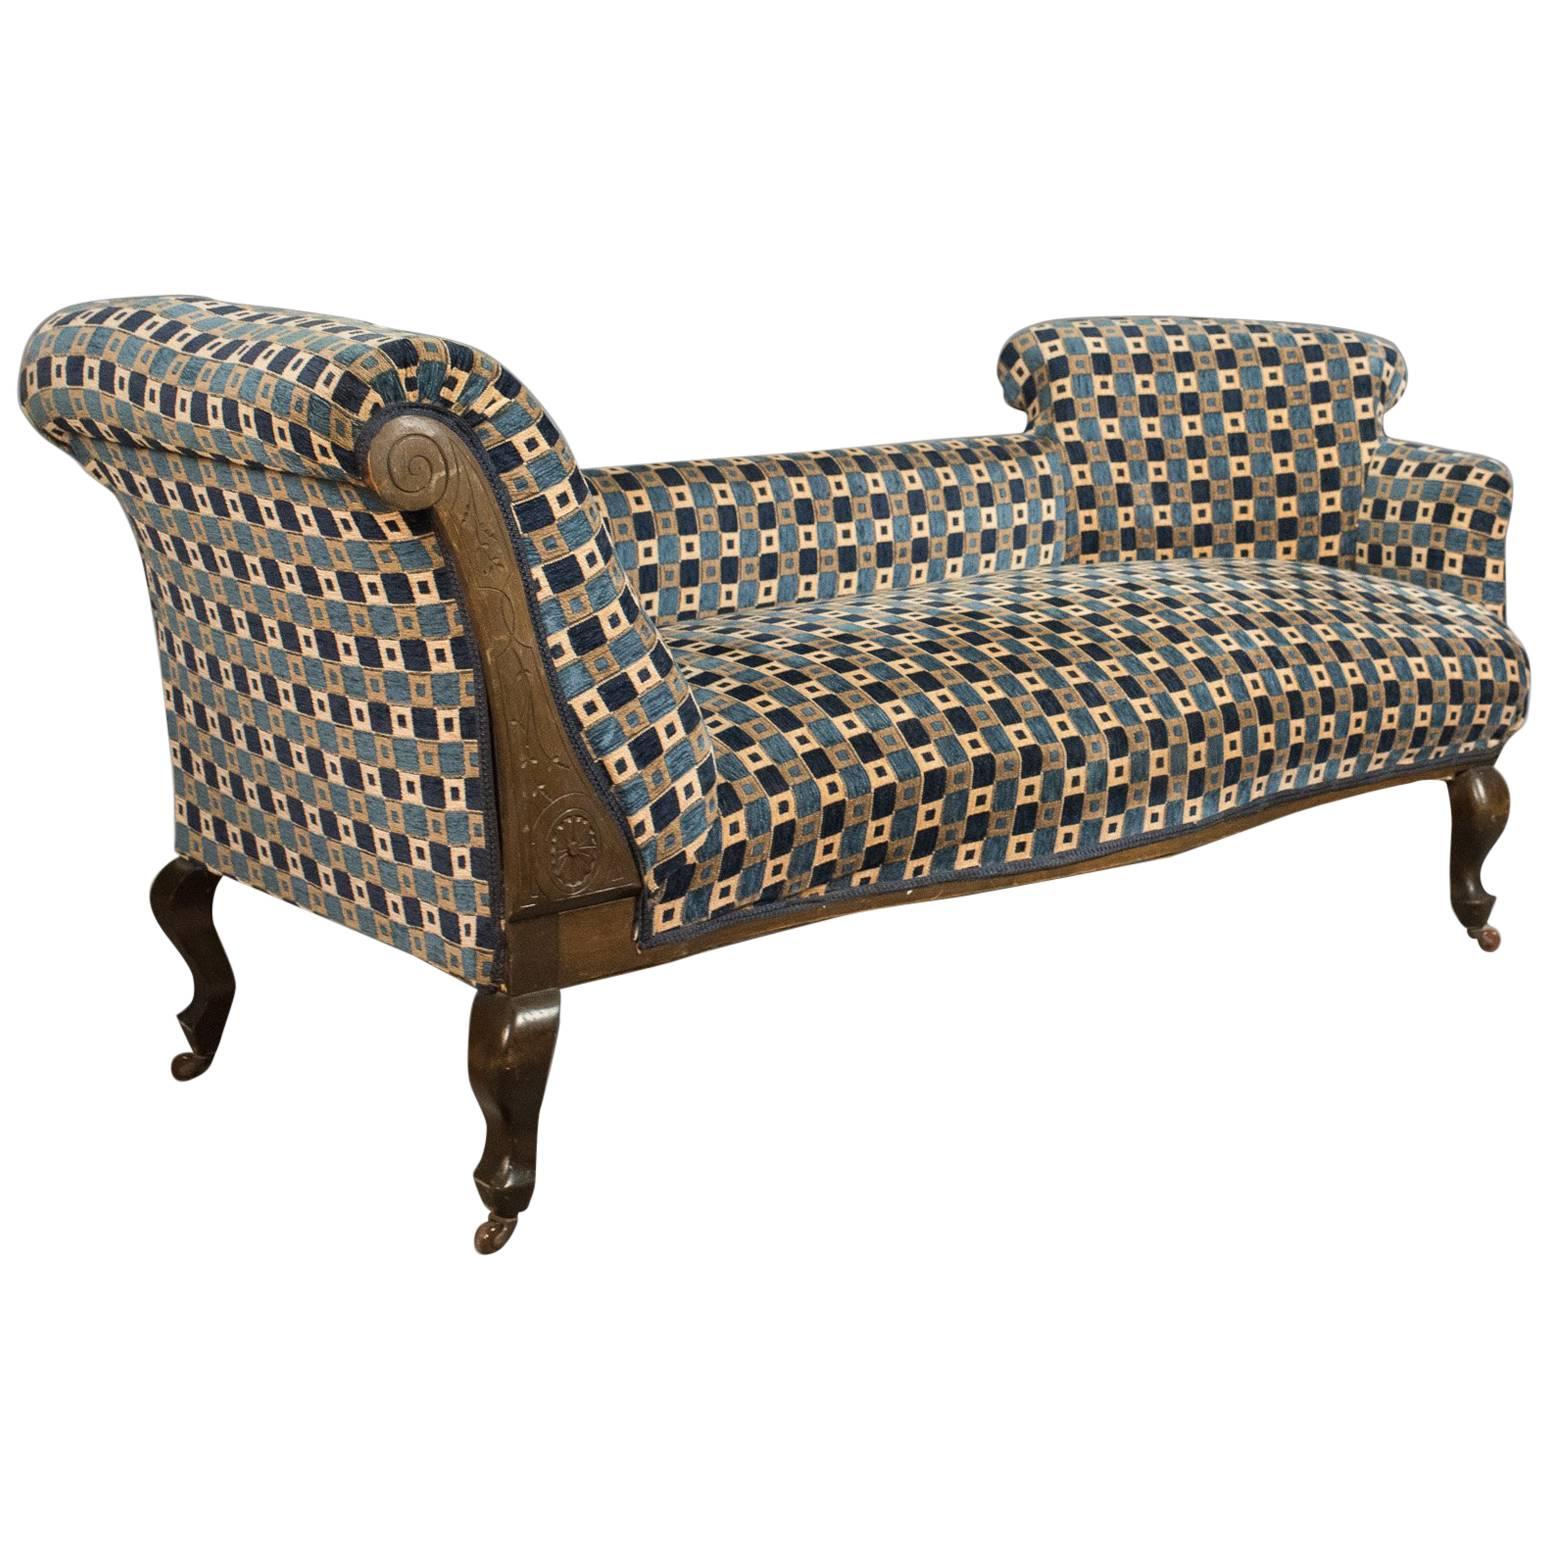 Antique Chaise Longue, Edwardian Daybed, English, circa 1910